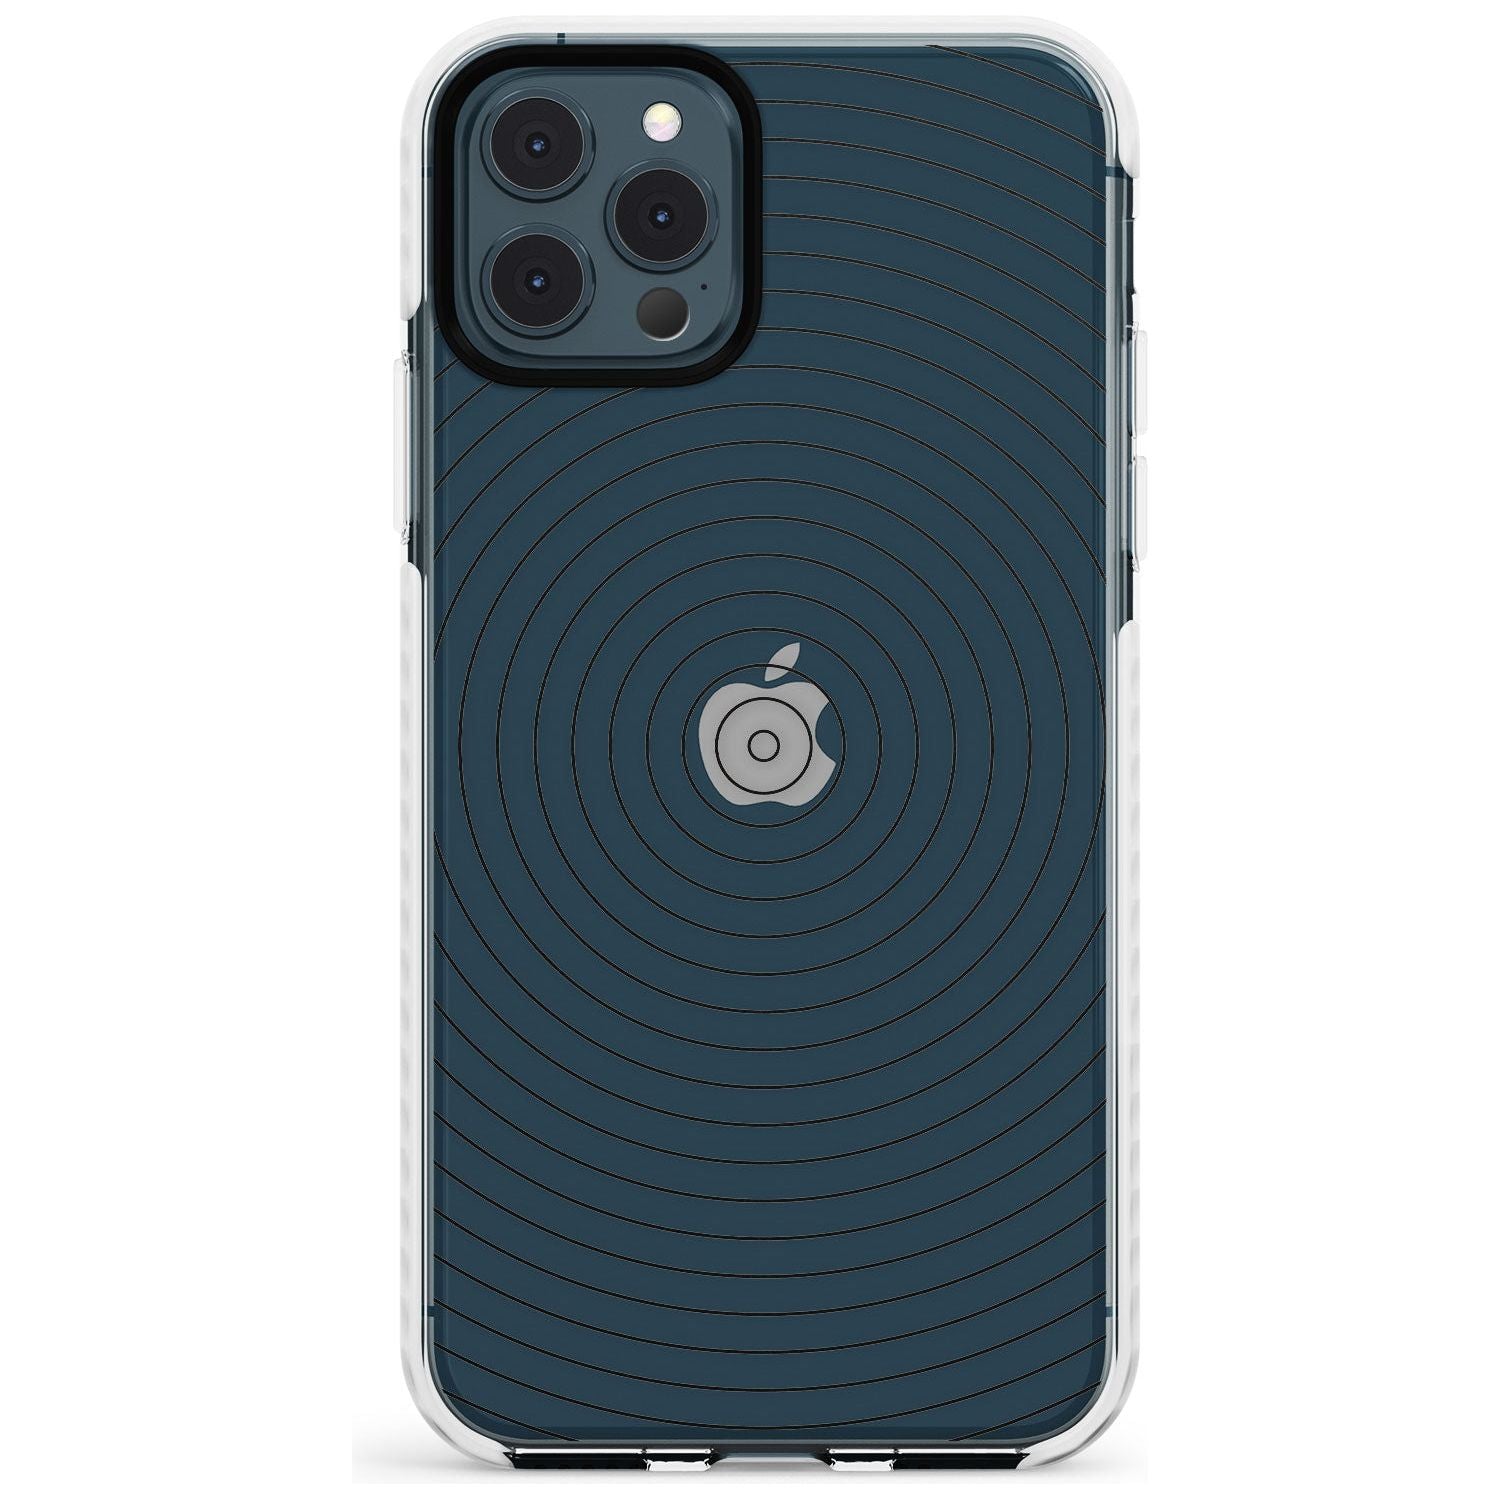 Abstract Lines: Circles Slim TPU Phone Case for iPhone 11 Pro Max